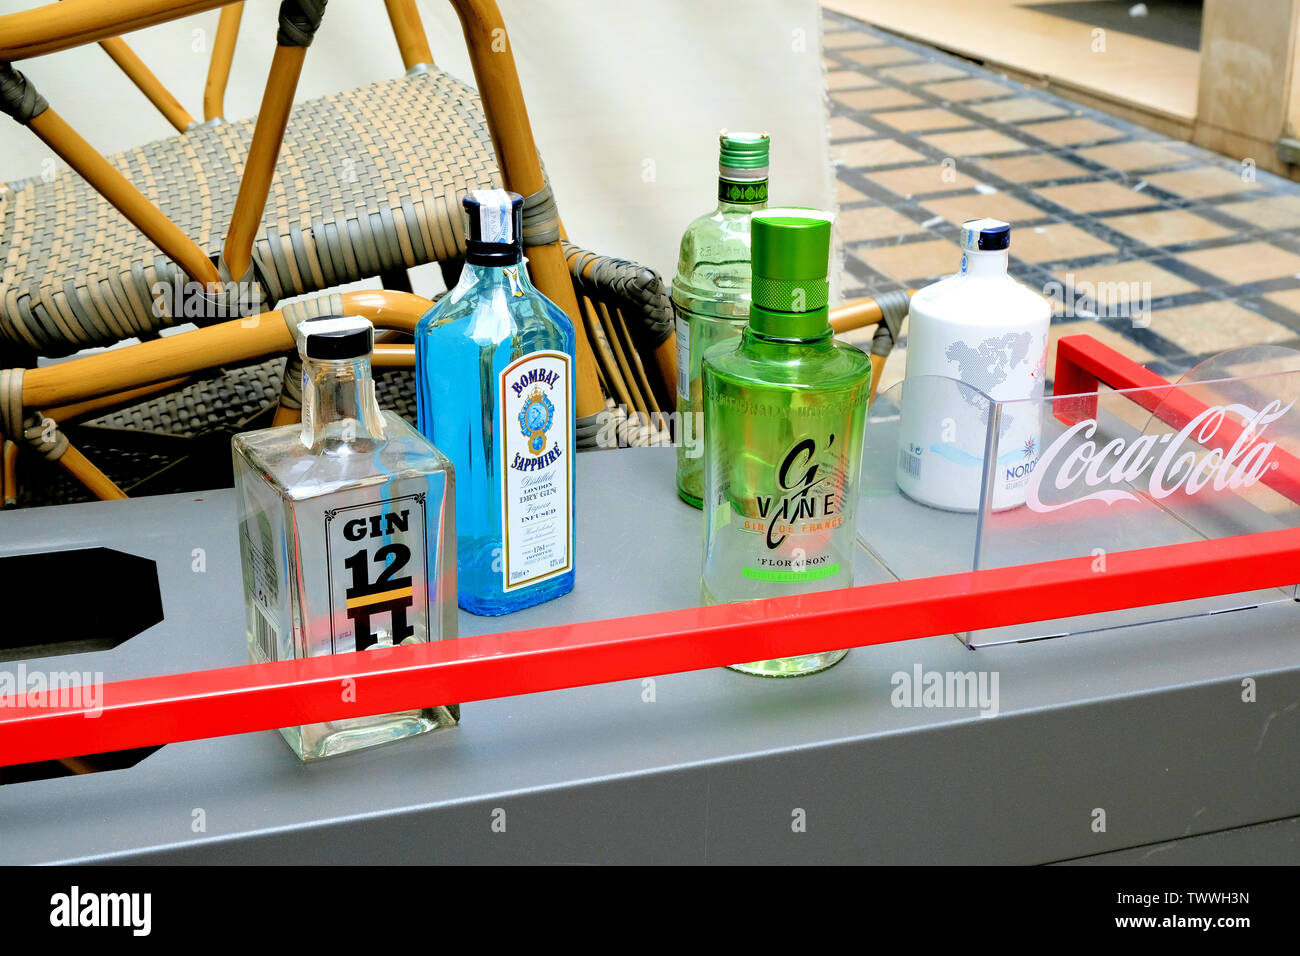 Top of a serving cart with bottles of assorted European gin: Tanqueray, Bombay Sapphire, G'vine, Nordes, and Gin 12/11. Stock Photo